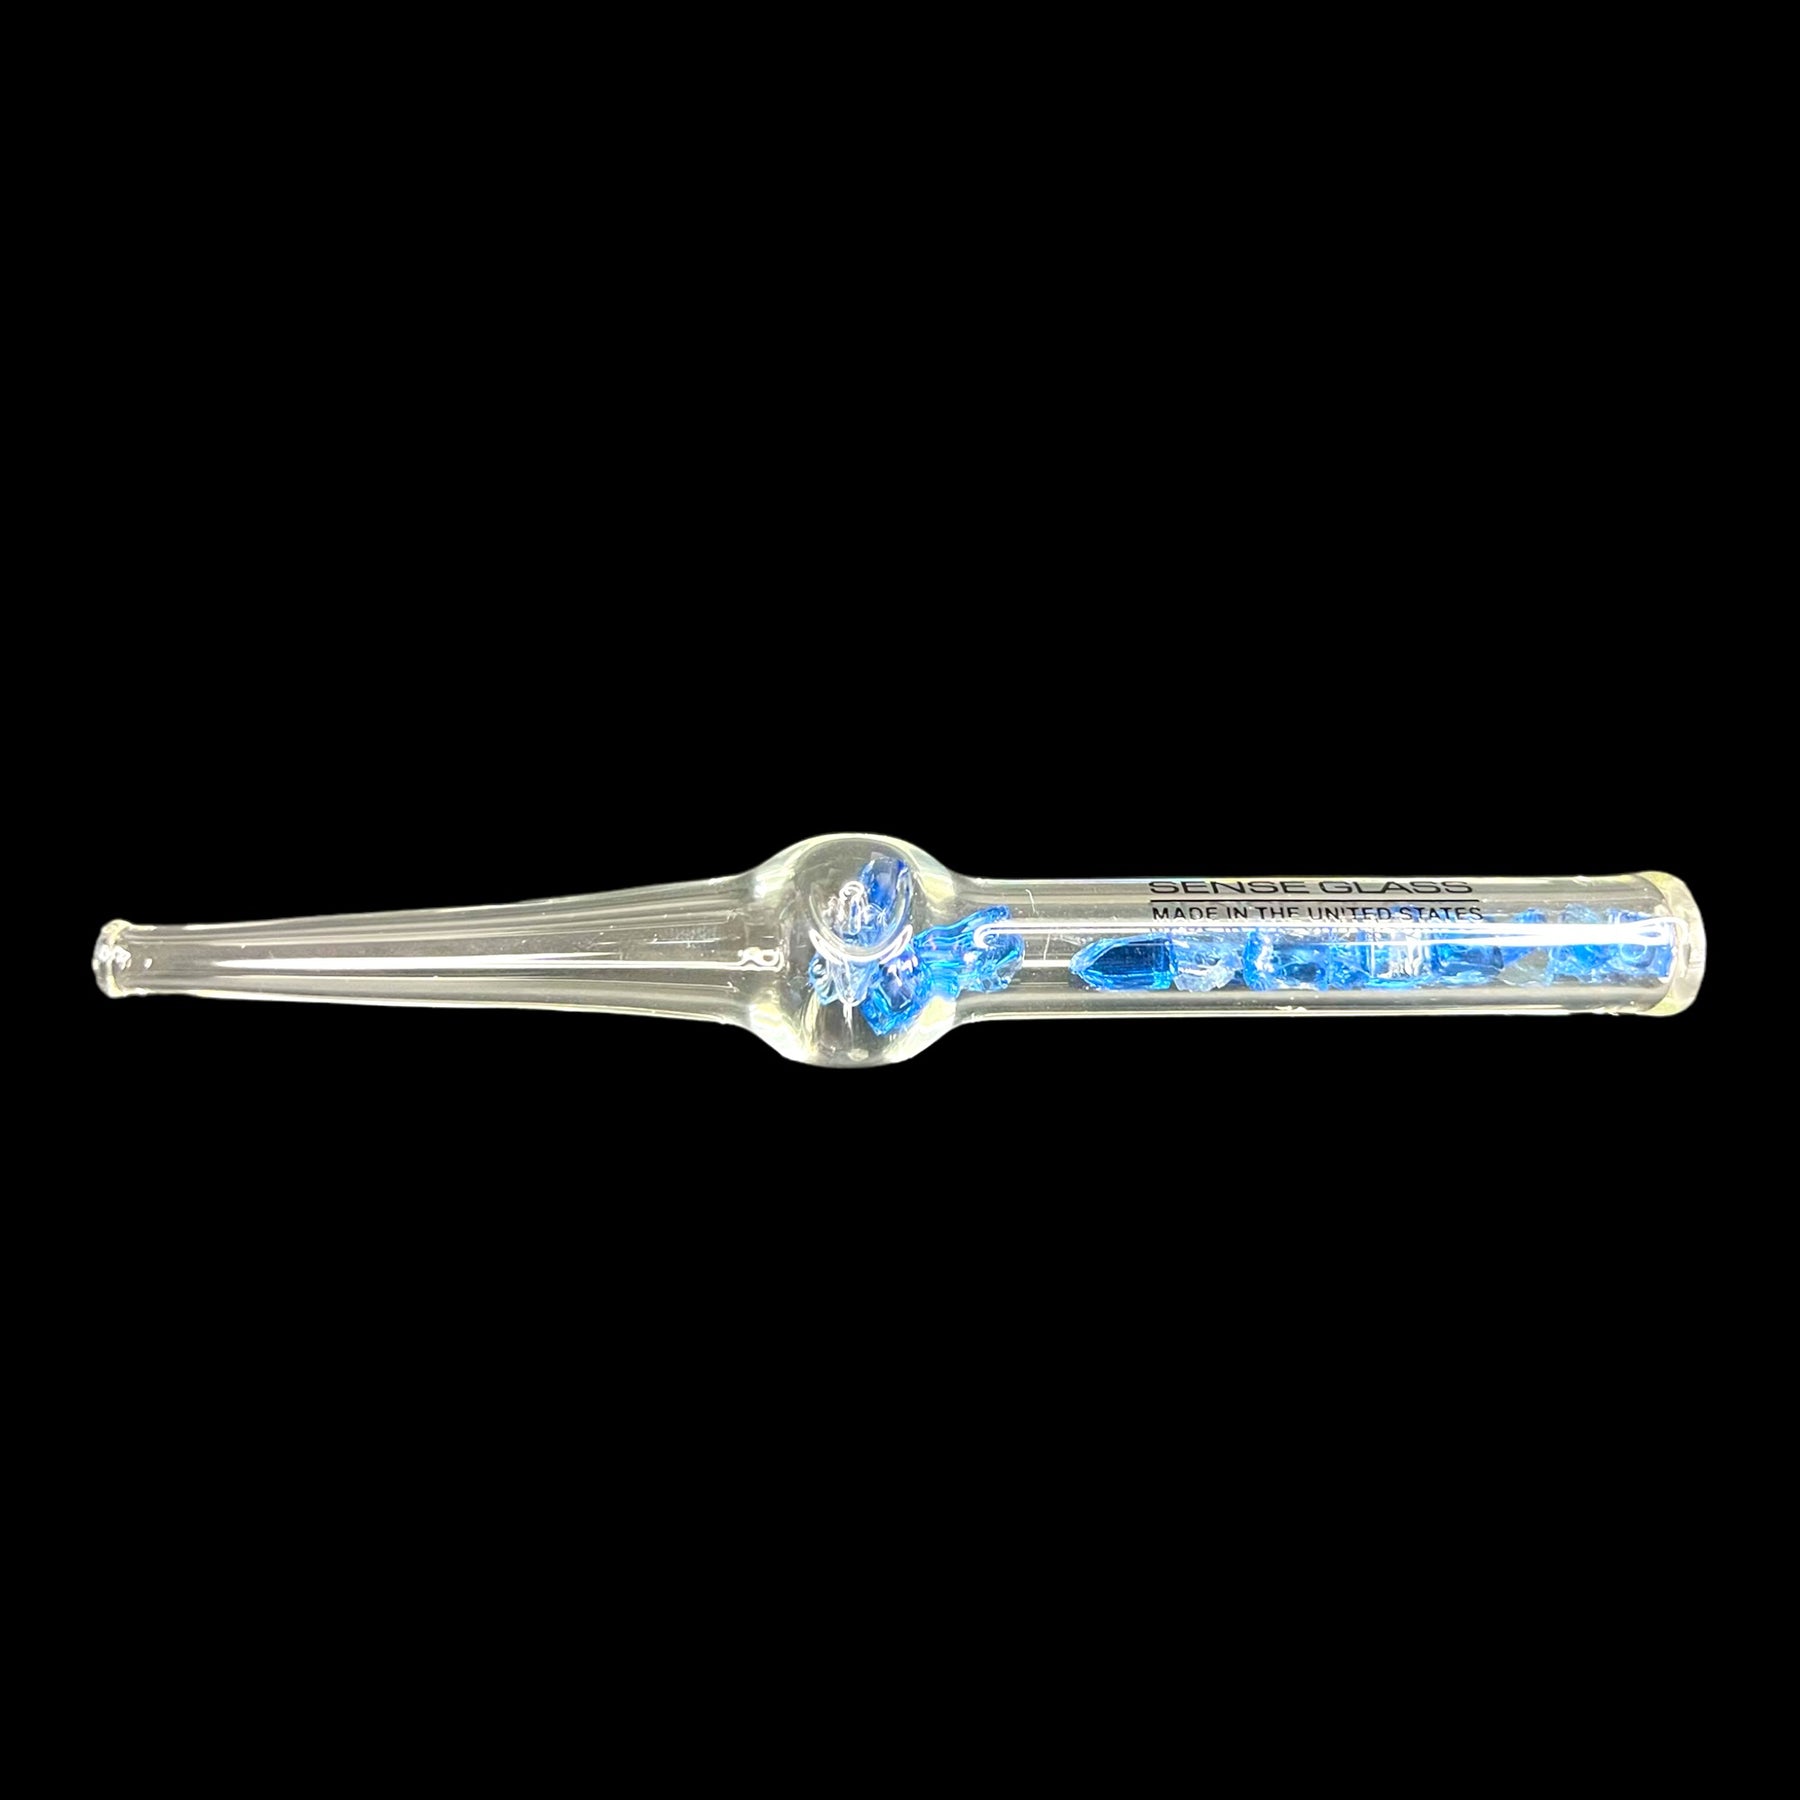 Nectar Collector Sense Glass with blue rocks 